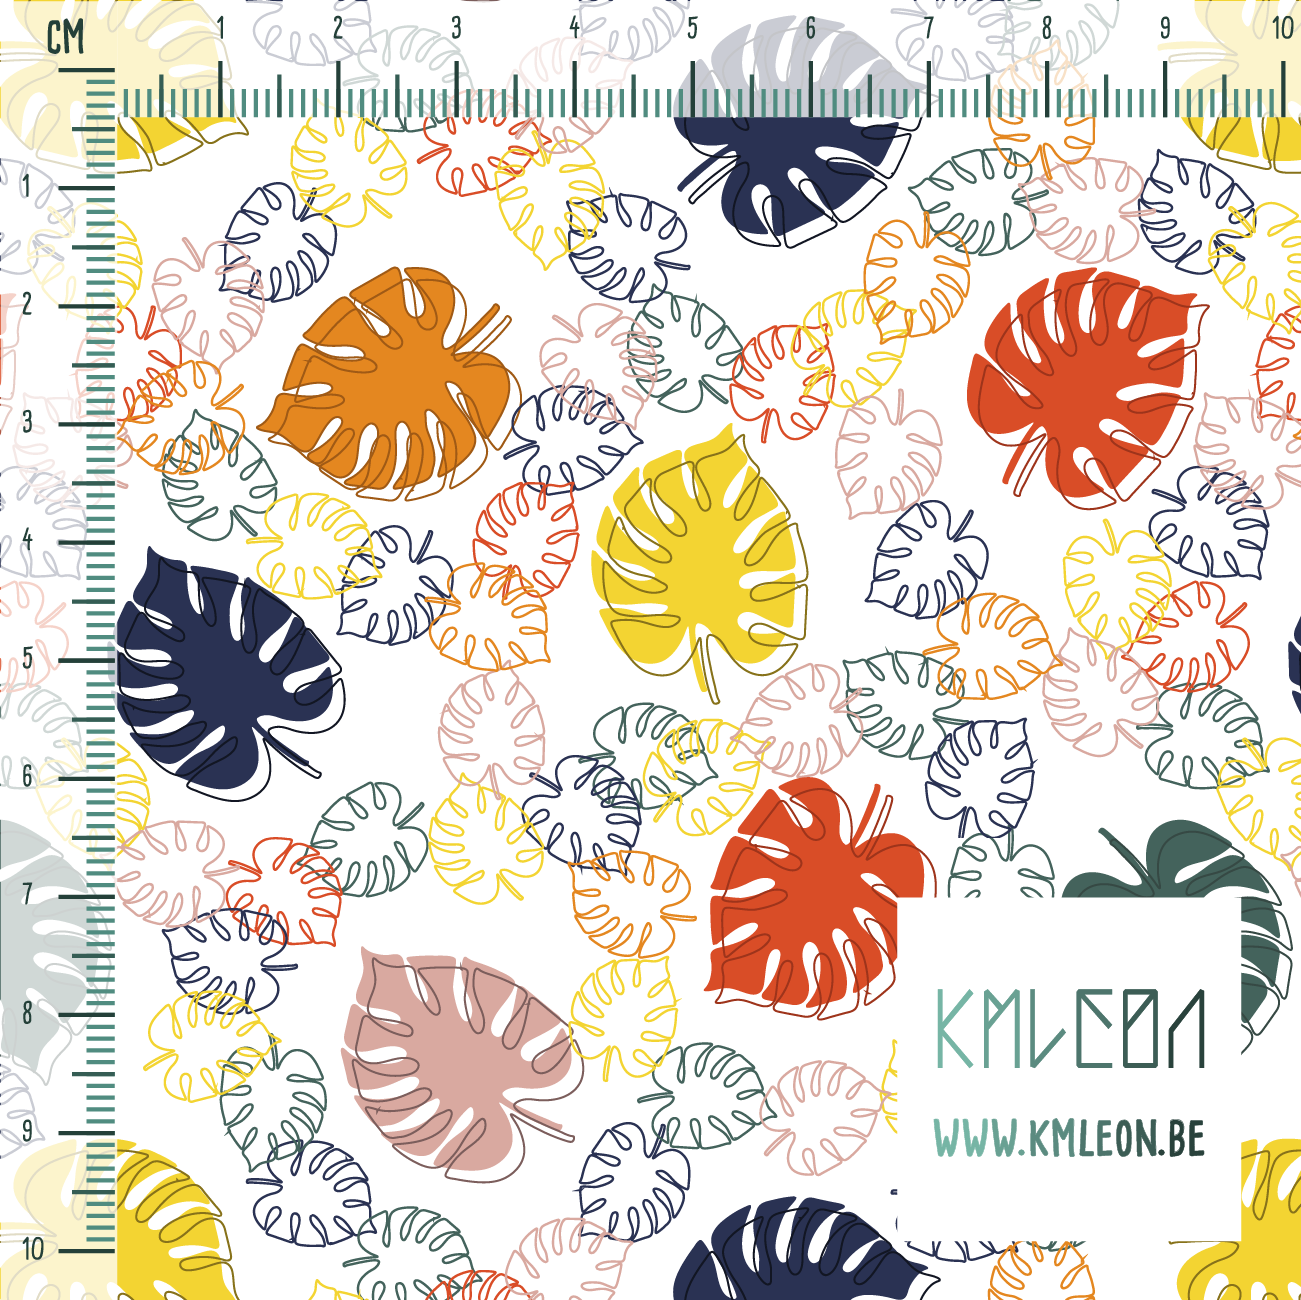 Colourful monstera leaves fabric